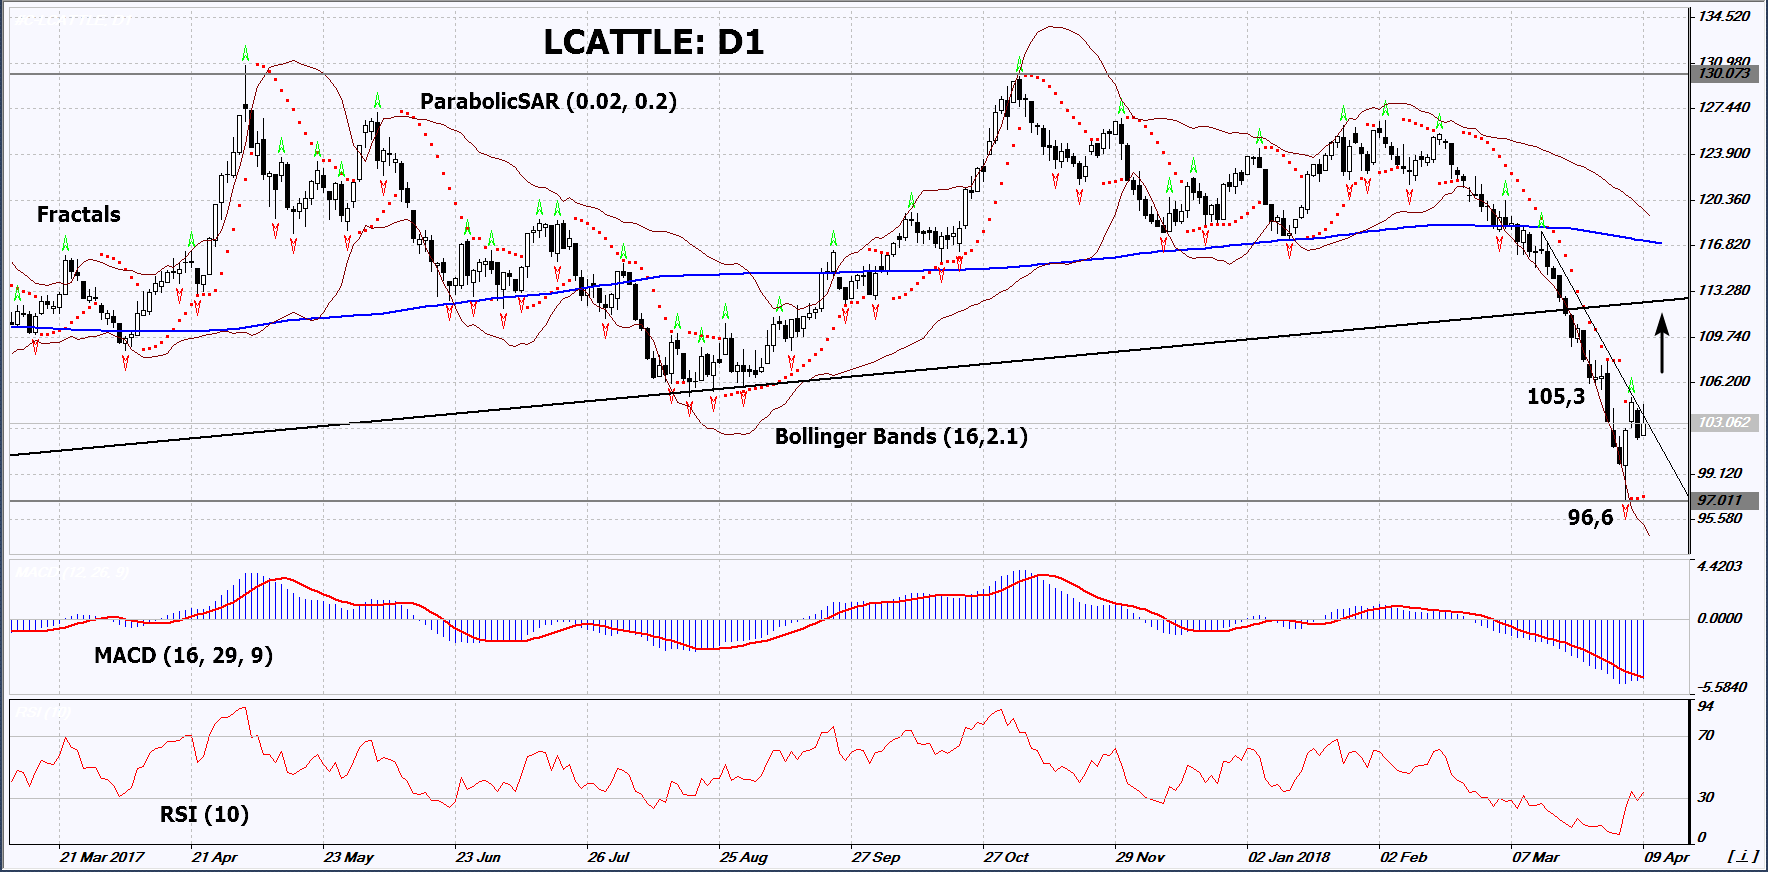 LCATTLE Daily Chart